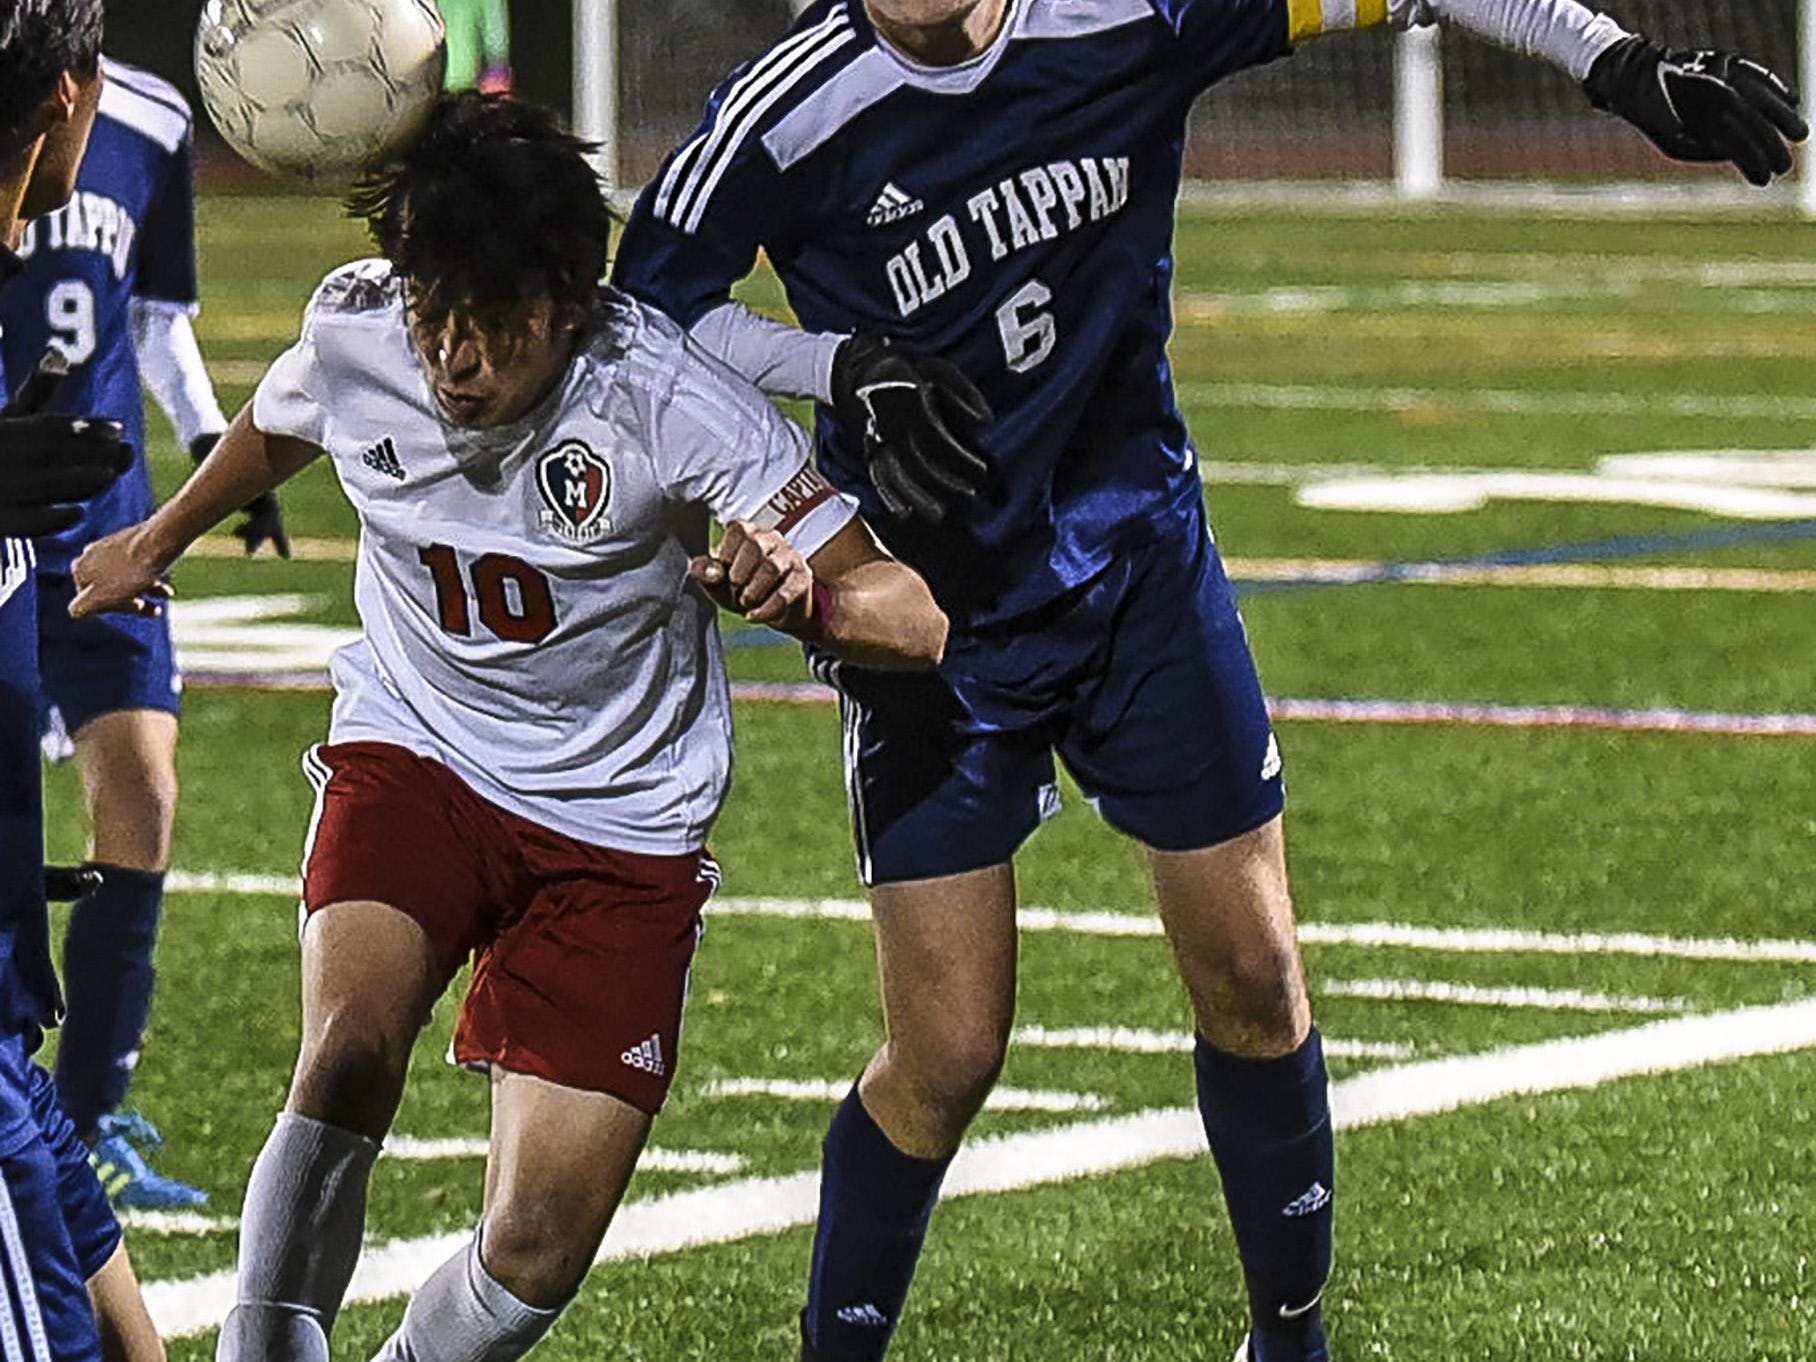 Mendham's Christian Perercini (10) heads the ball away from Old Tappan's Kevin Loudon (6) in the NJSIAA Group III Semifinal at Ridge High School in Basking Ridge, November 17, 2015. Photo by Warren Wetura for the Daily Record.